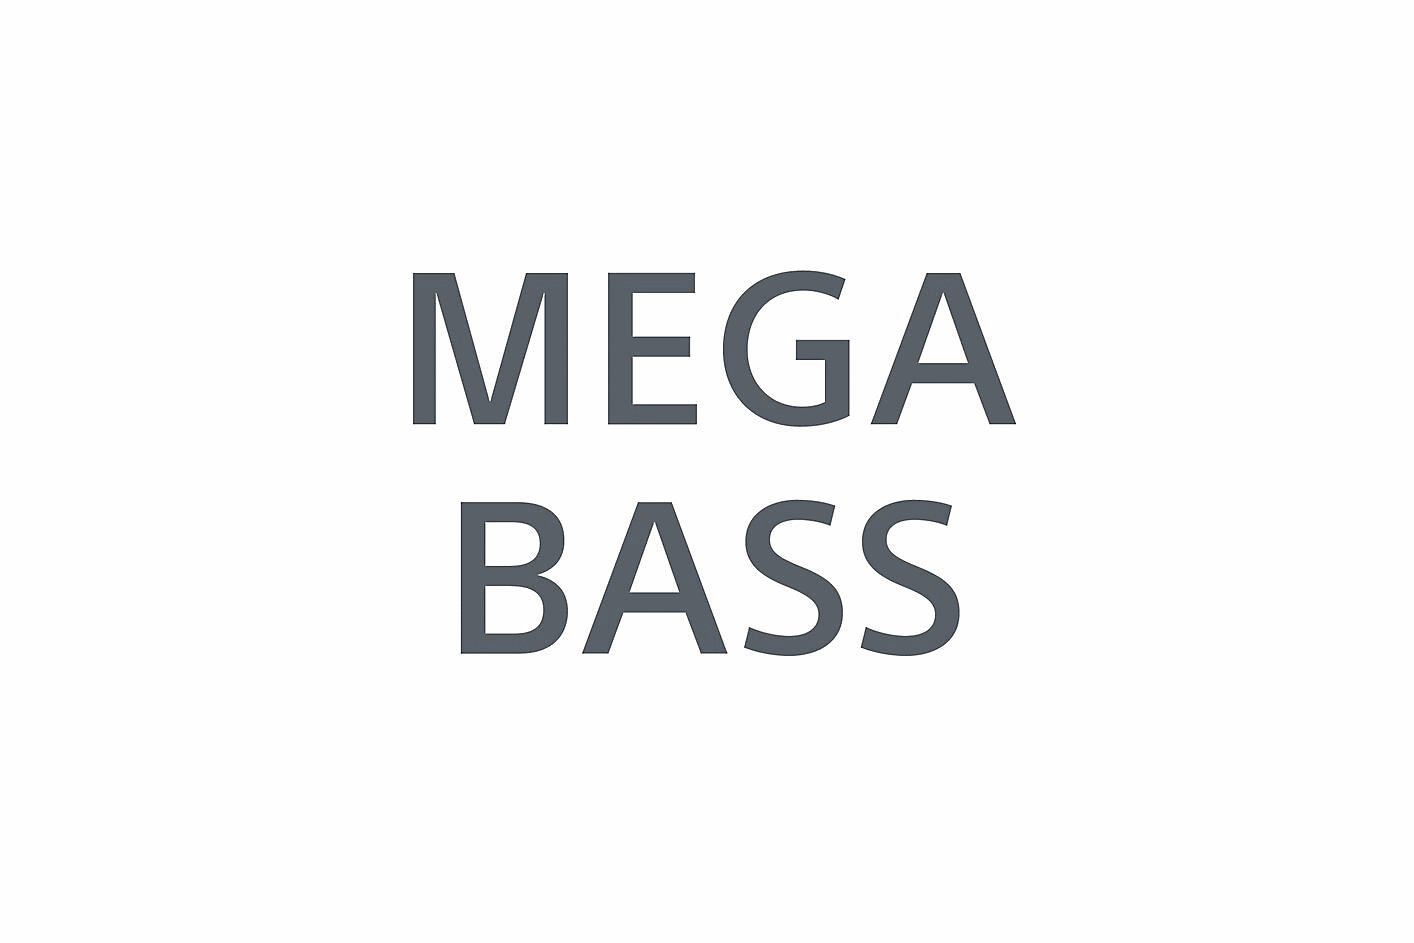 Image of the words MEGA BASS